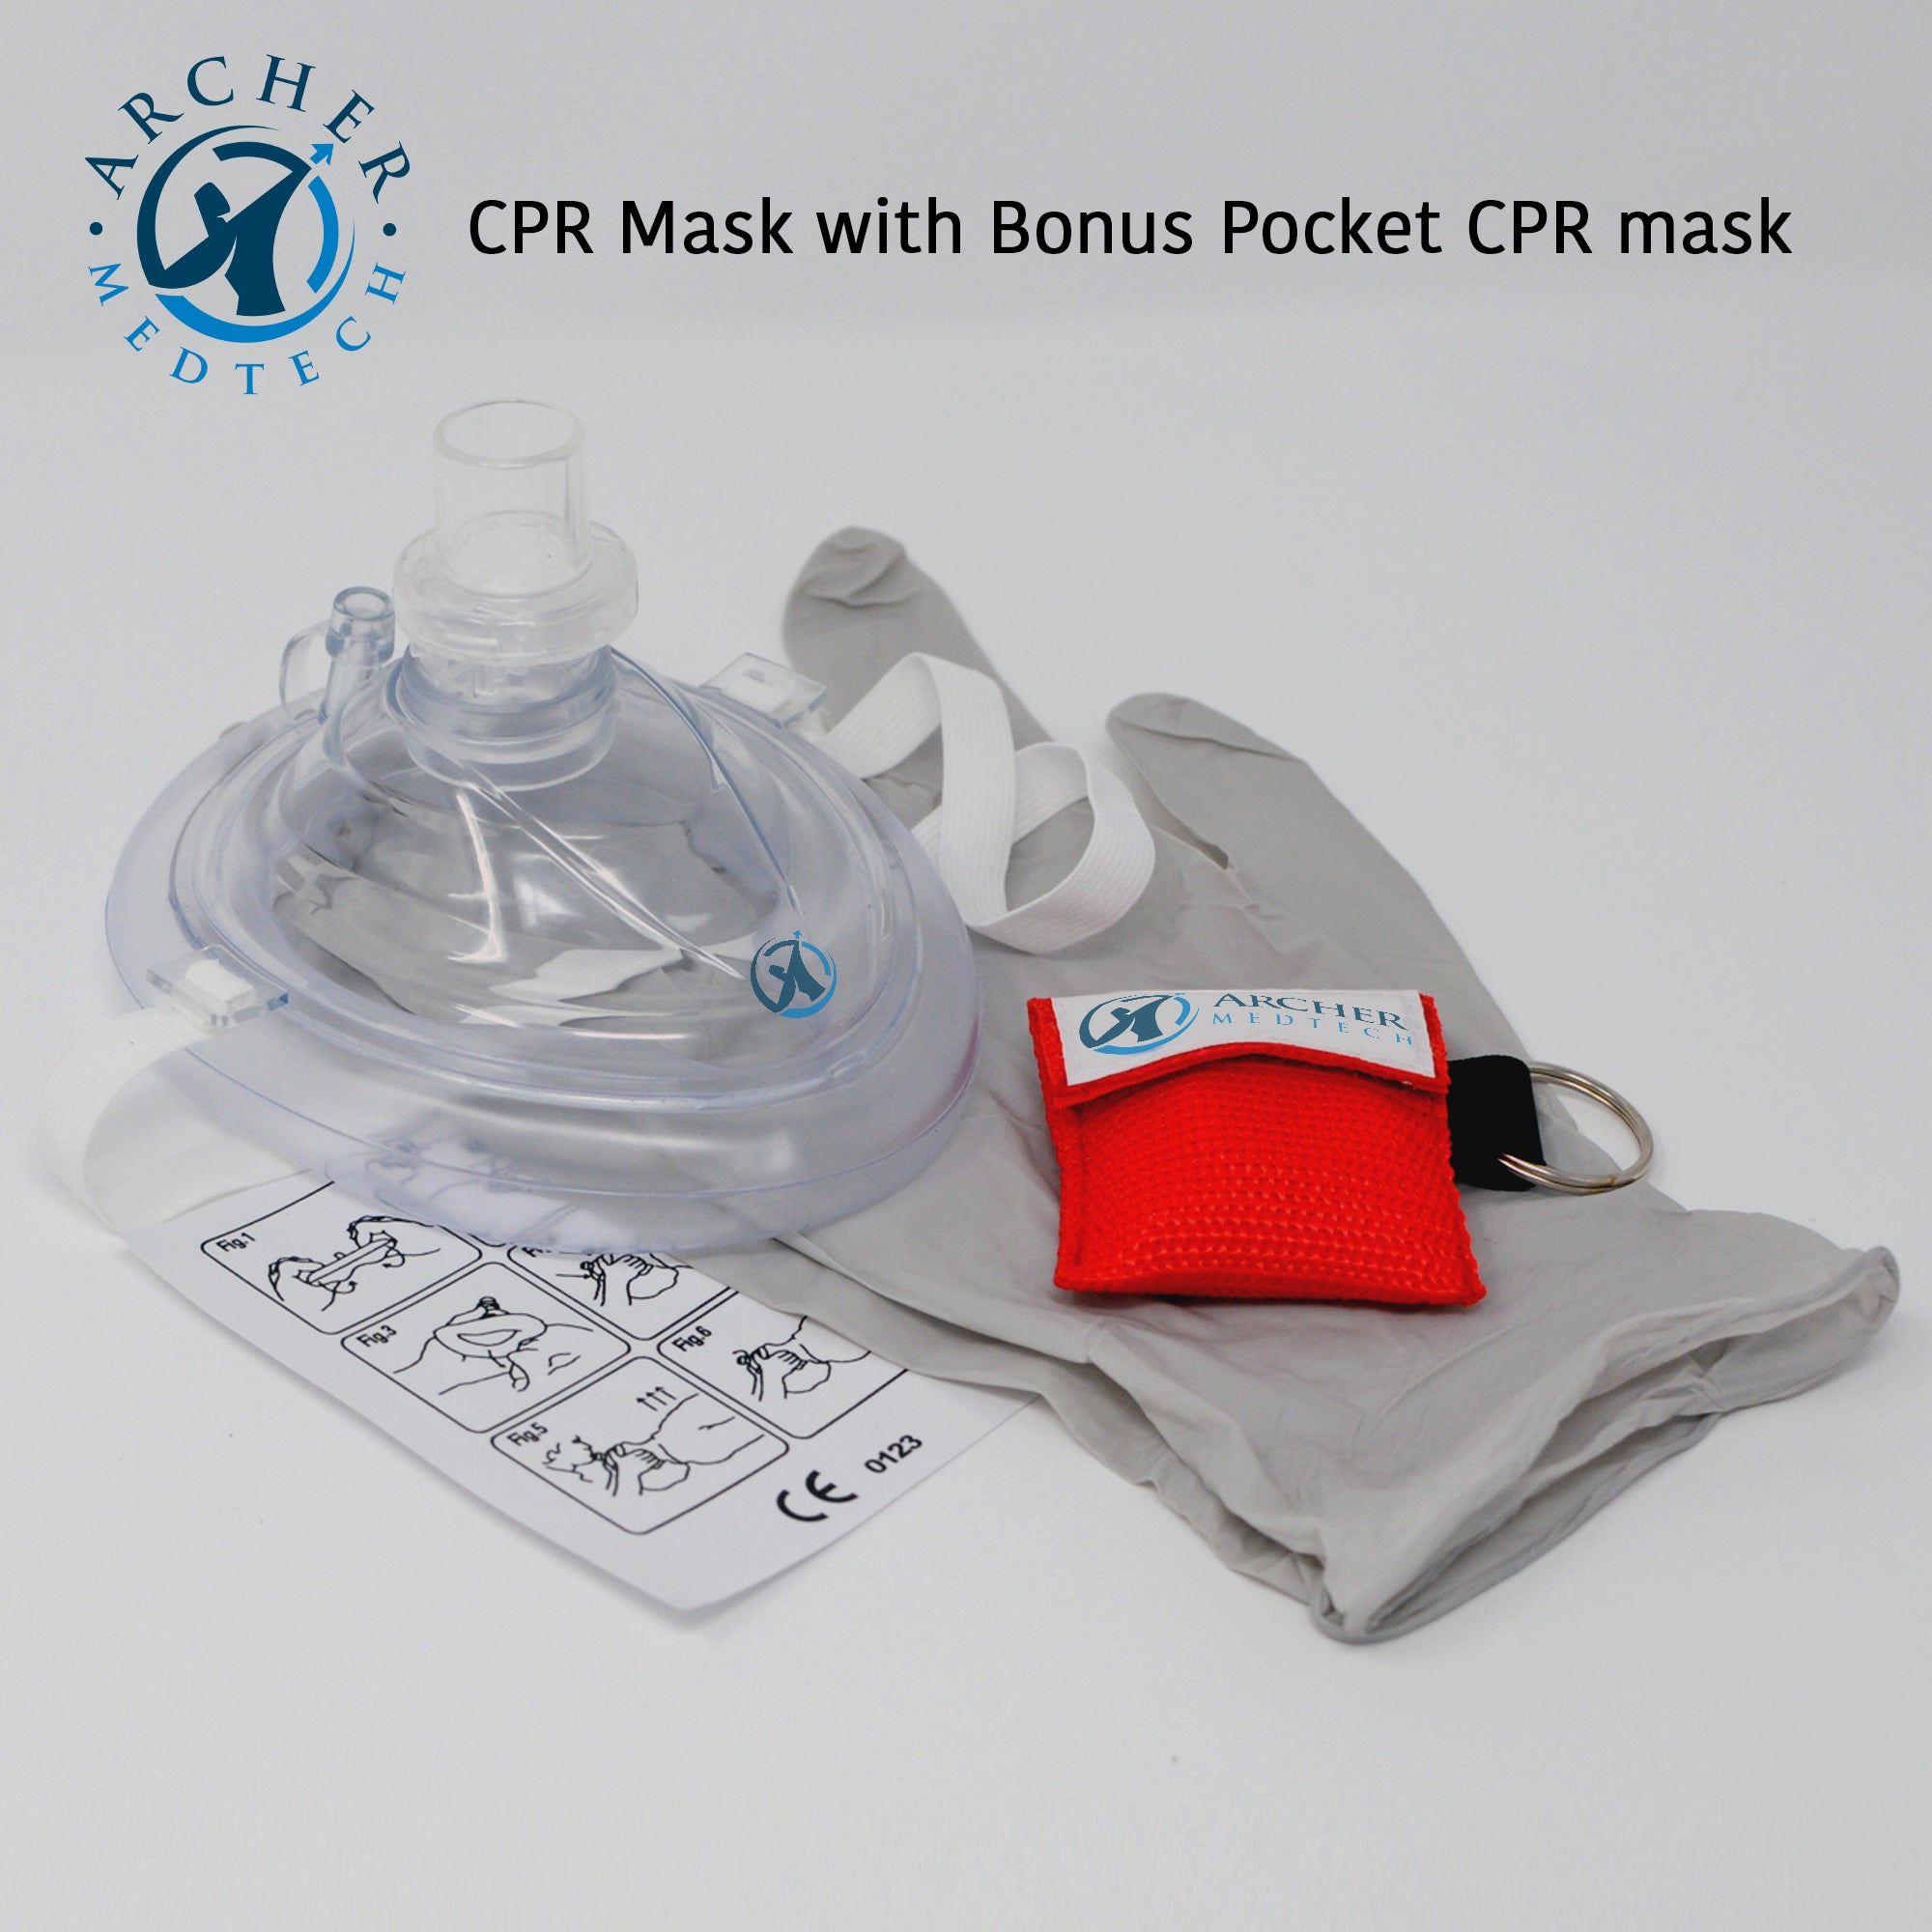 Archer MedTech CPR Mask with One-Way Breath Valve - First Aid Face Shi